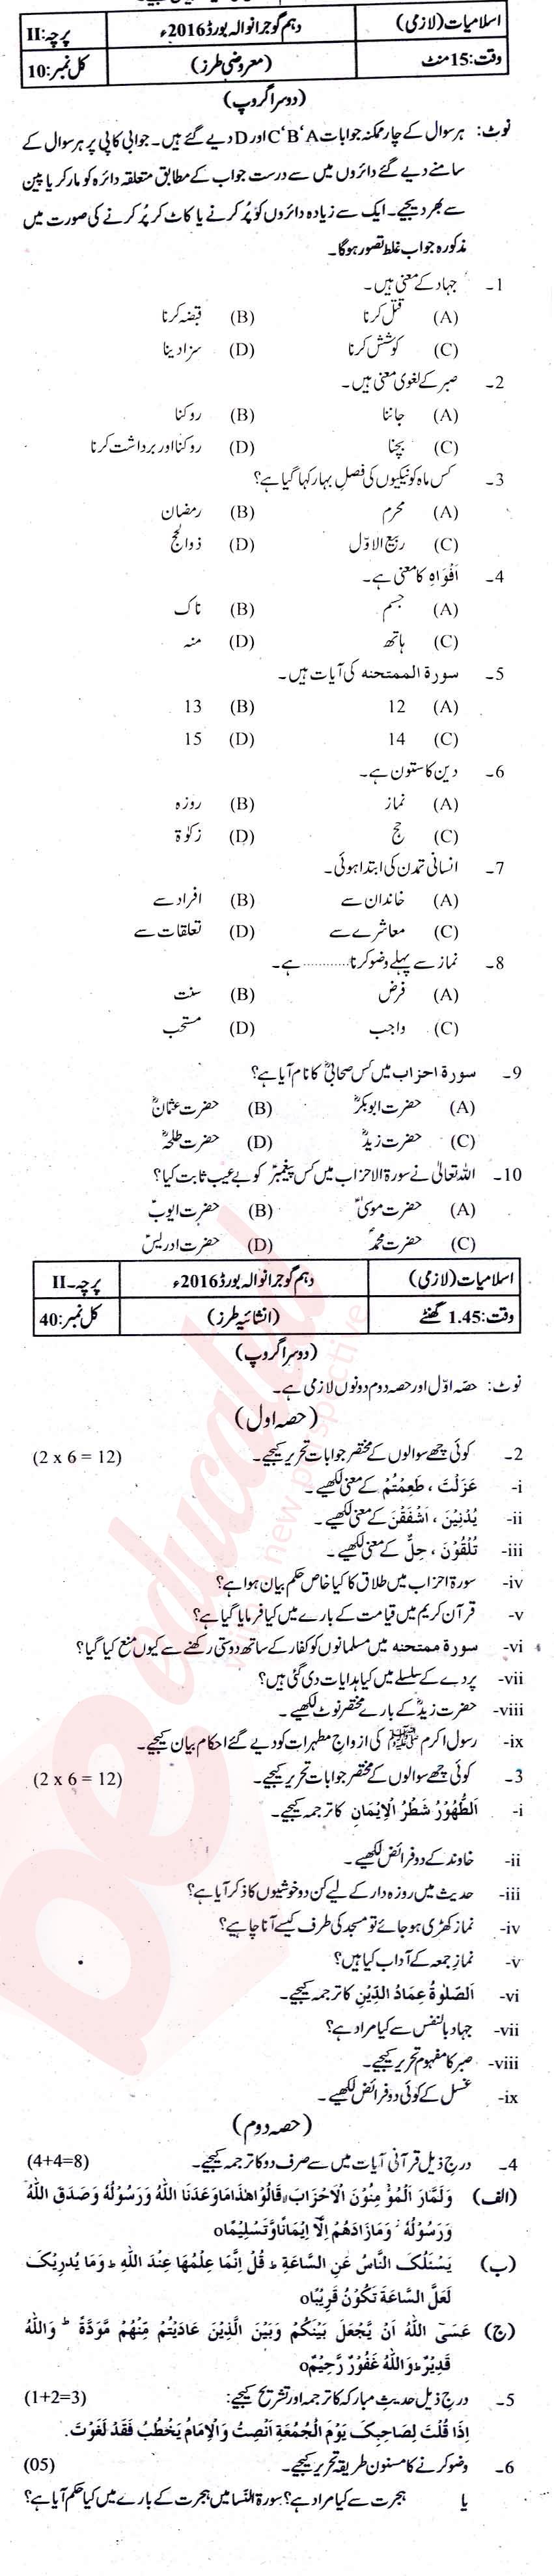 Islamiat (Compulsory) 10th class Past Paper Group 2 BISE Gujranwala 2016